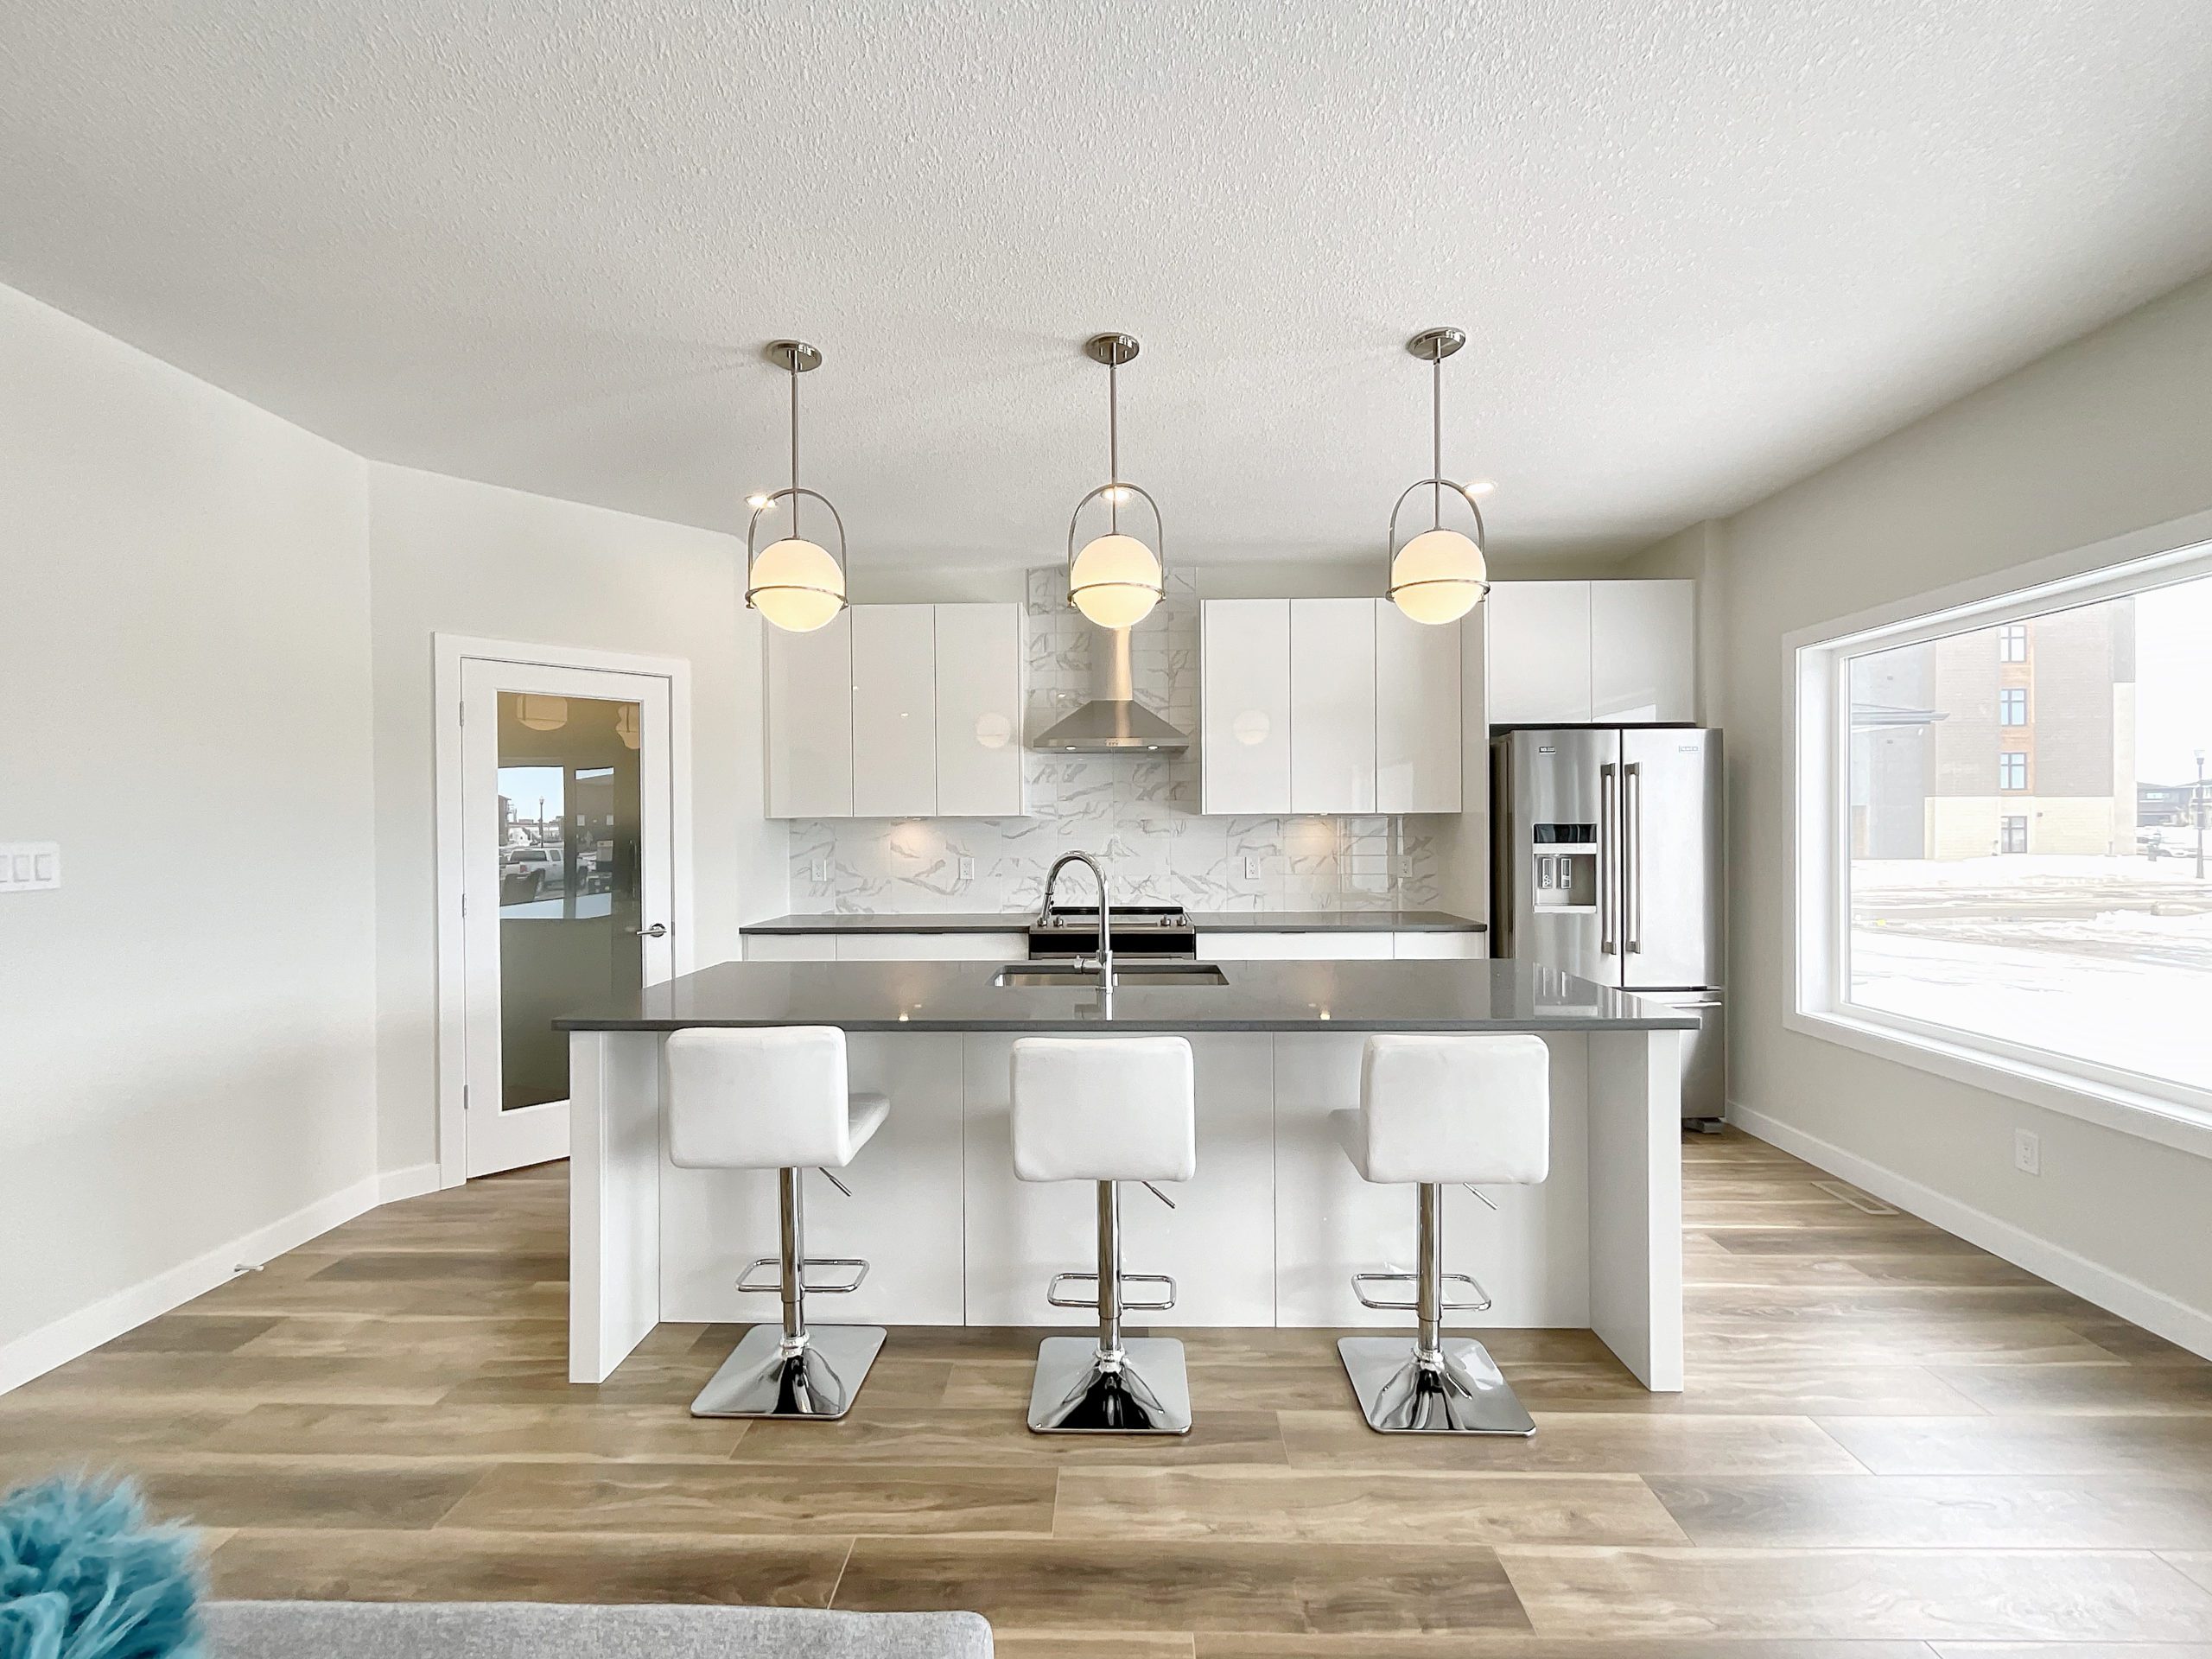 Shows the modern kitchen with a center island and three counter height stools.